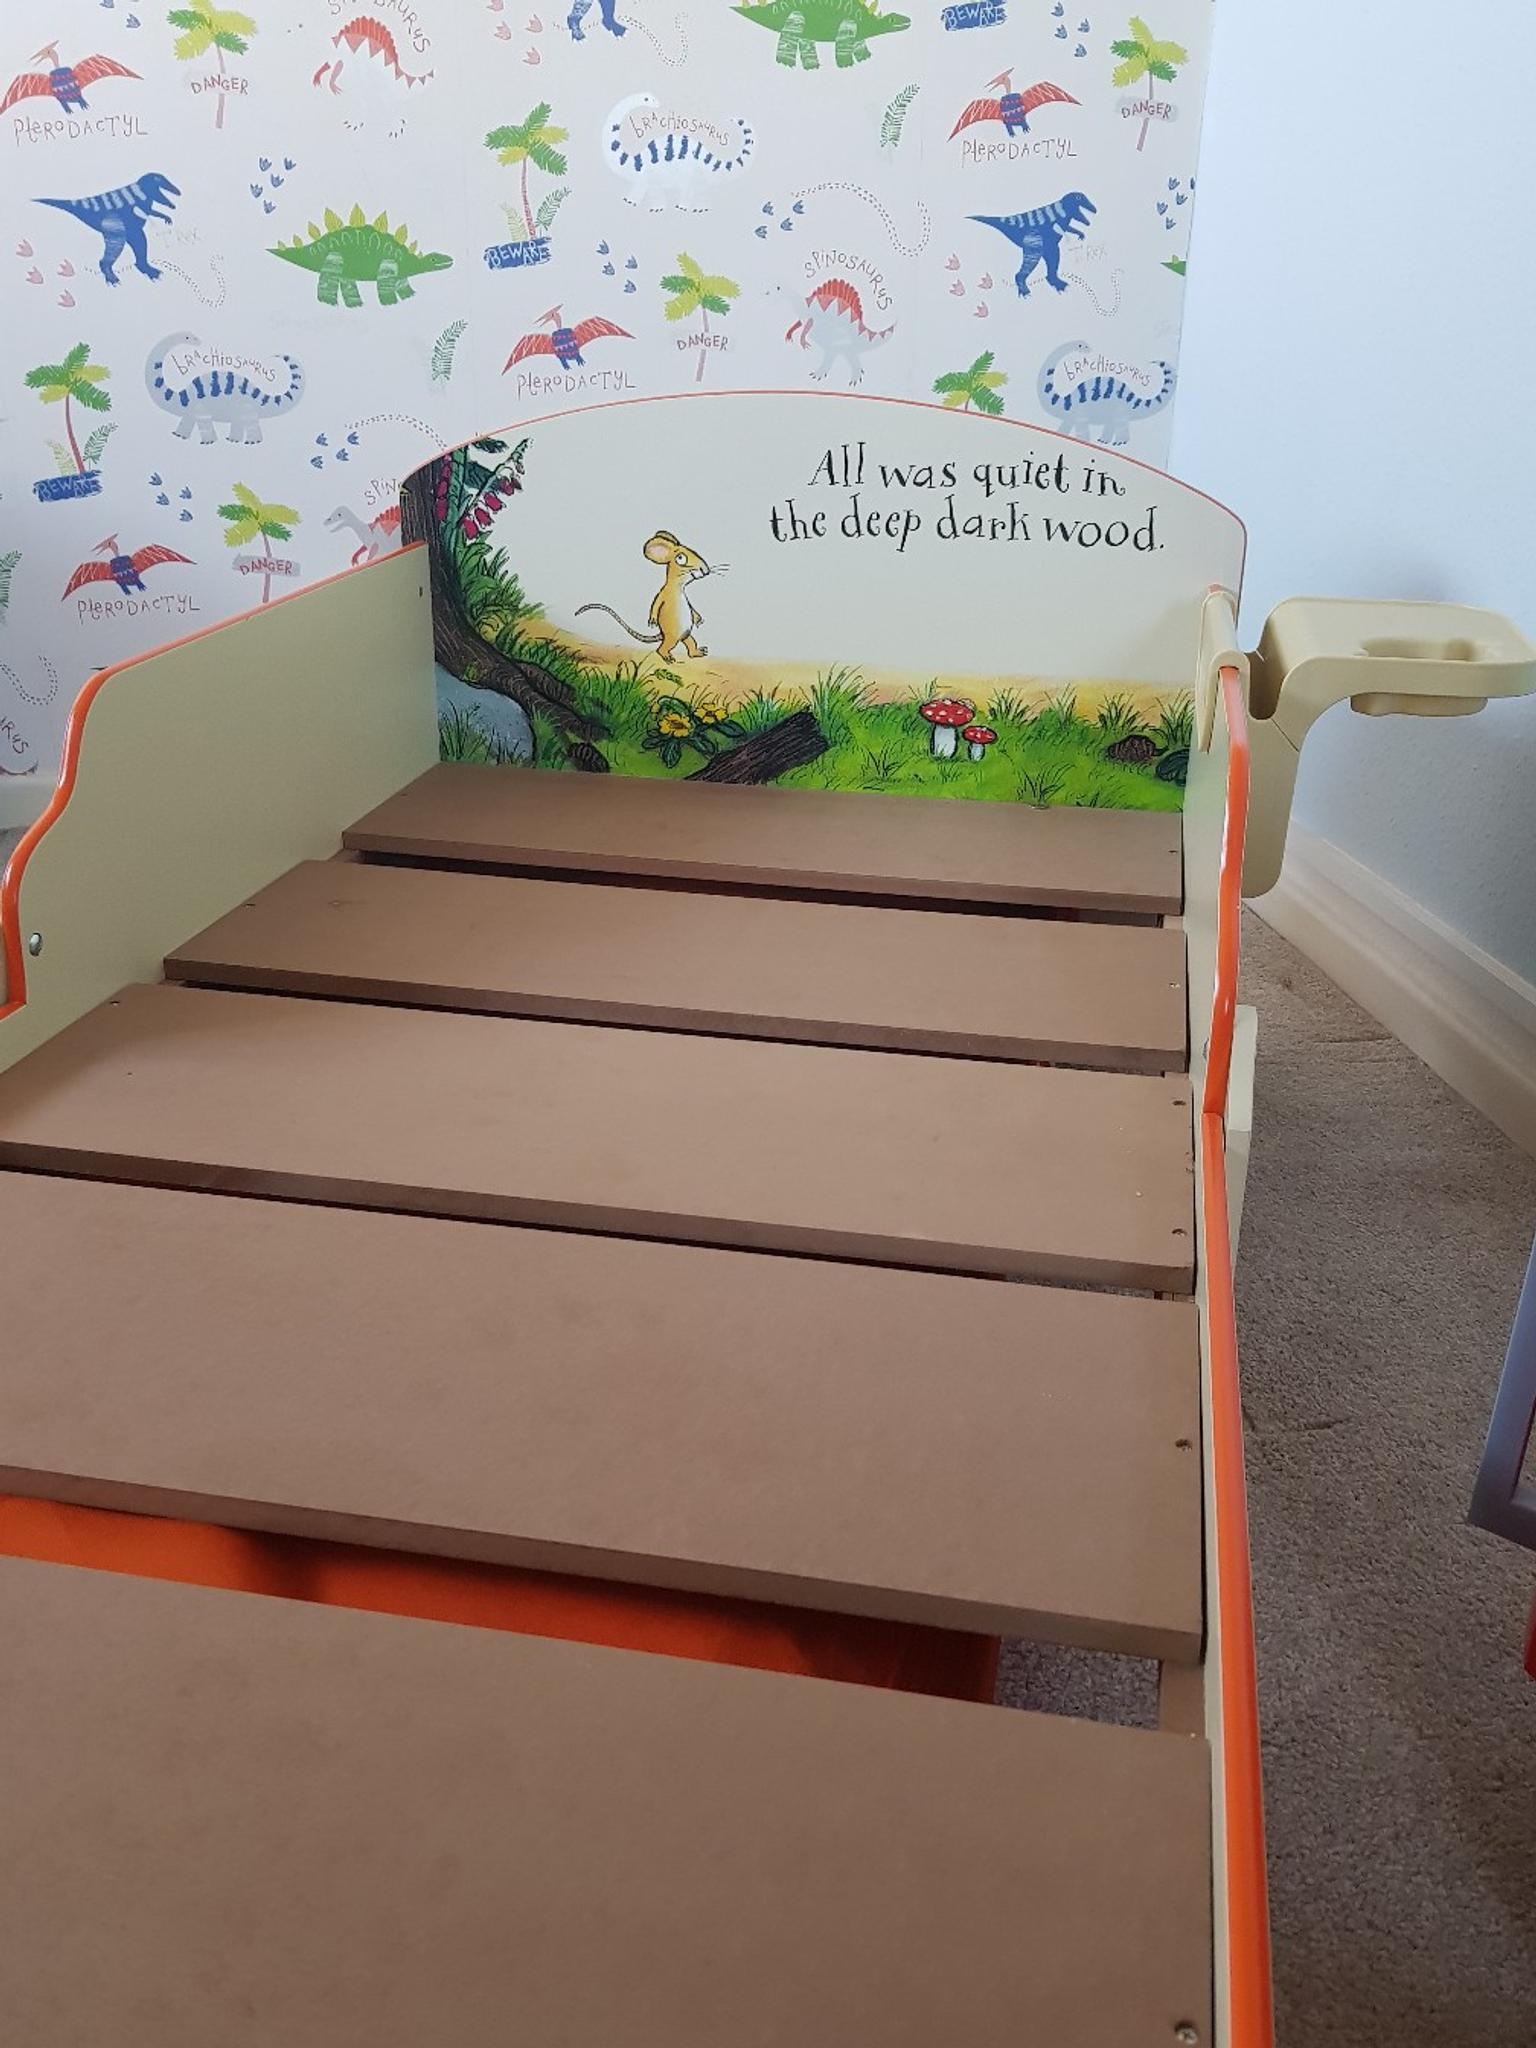 Gruffalo Bedroom Furniture In Ws15 Chase For 100 00 For Sale Shpock